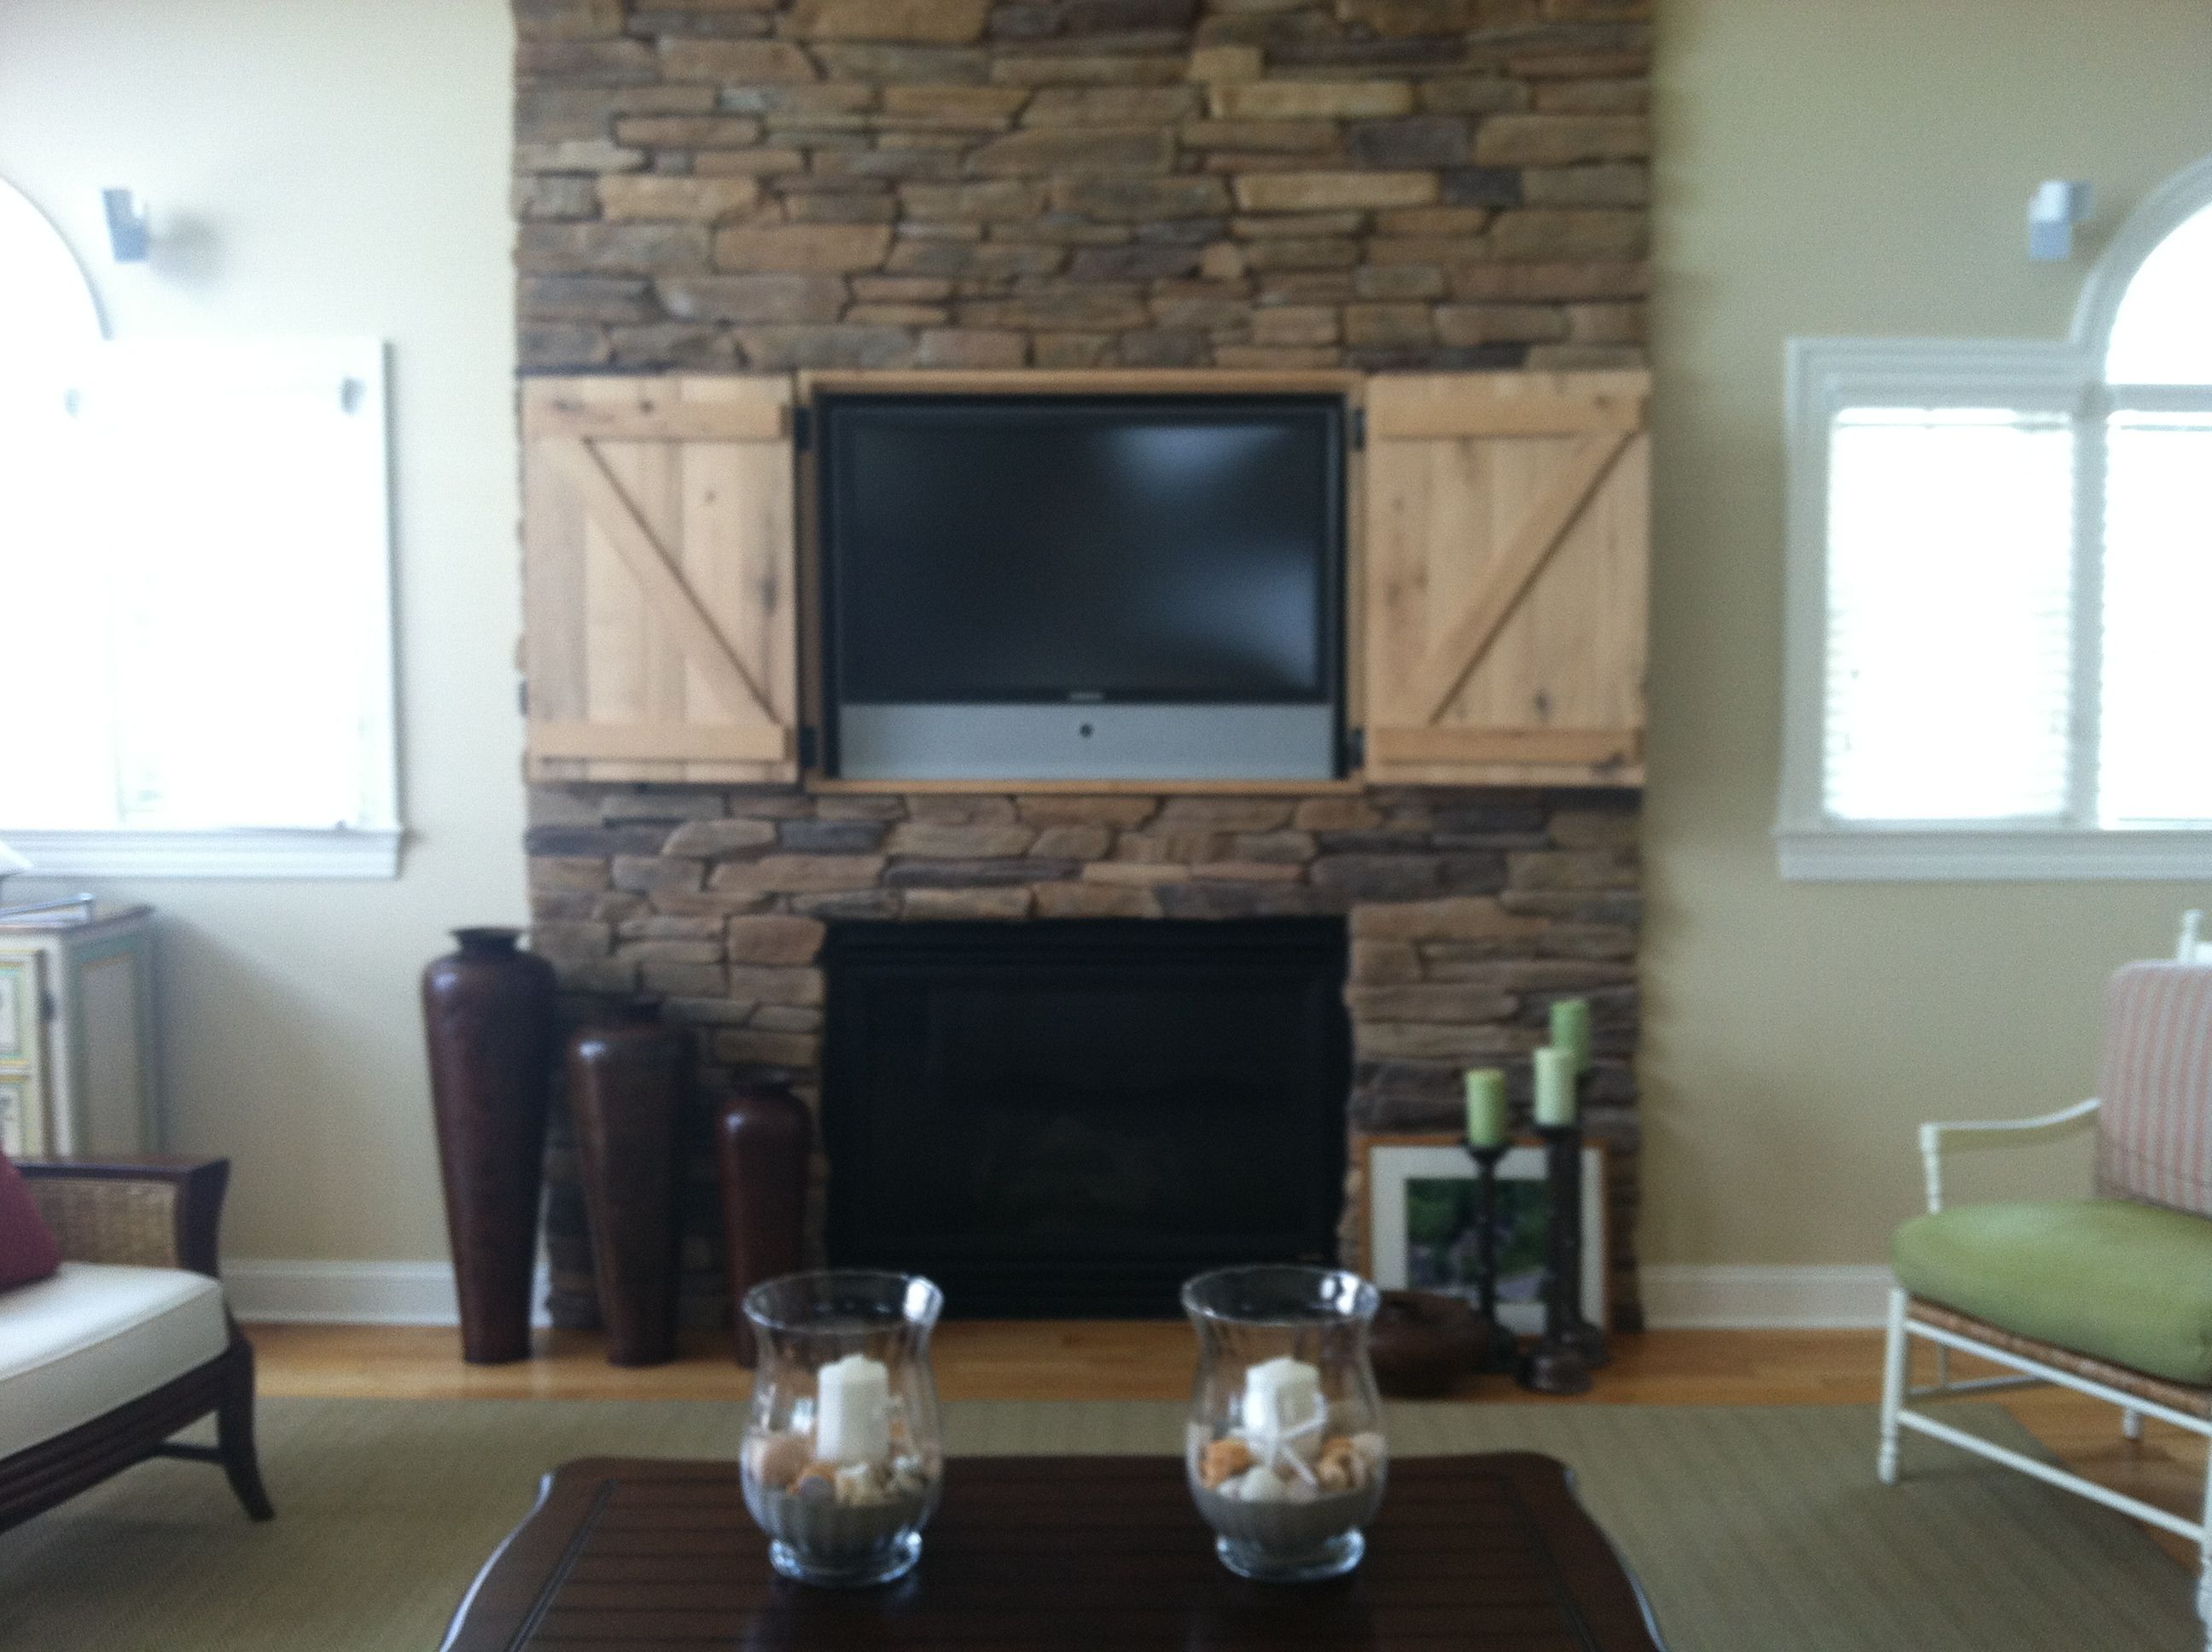 How to Hide Tv Wires Over Fireplace Fresh Hidden Tv Over Fireplace Open Doors Decor and Design